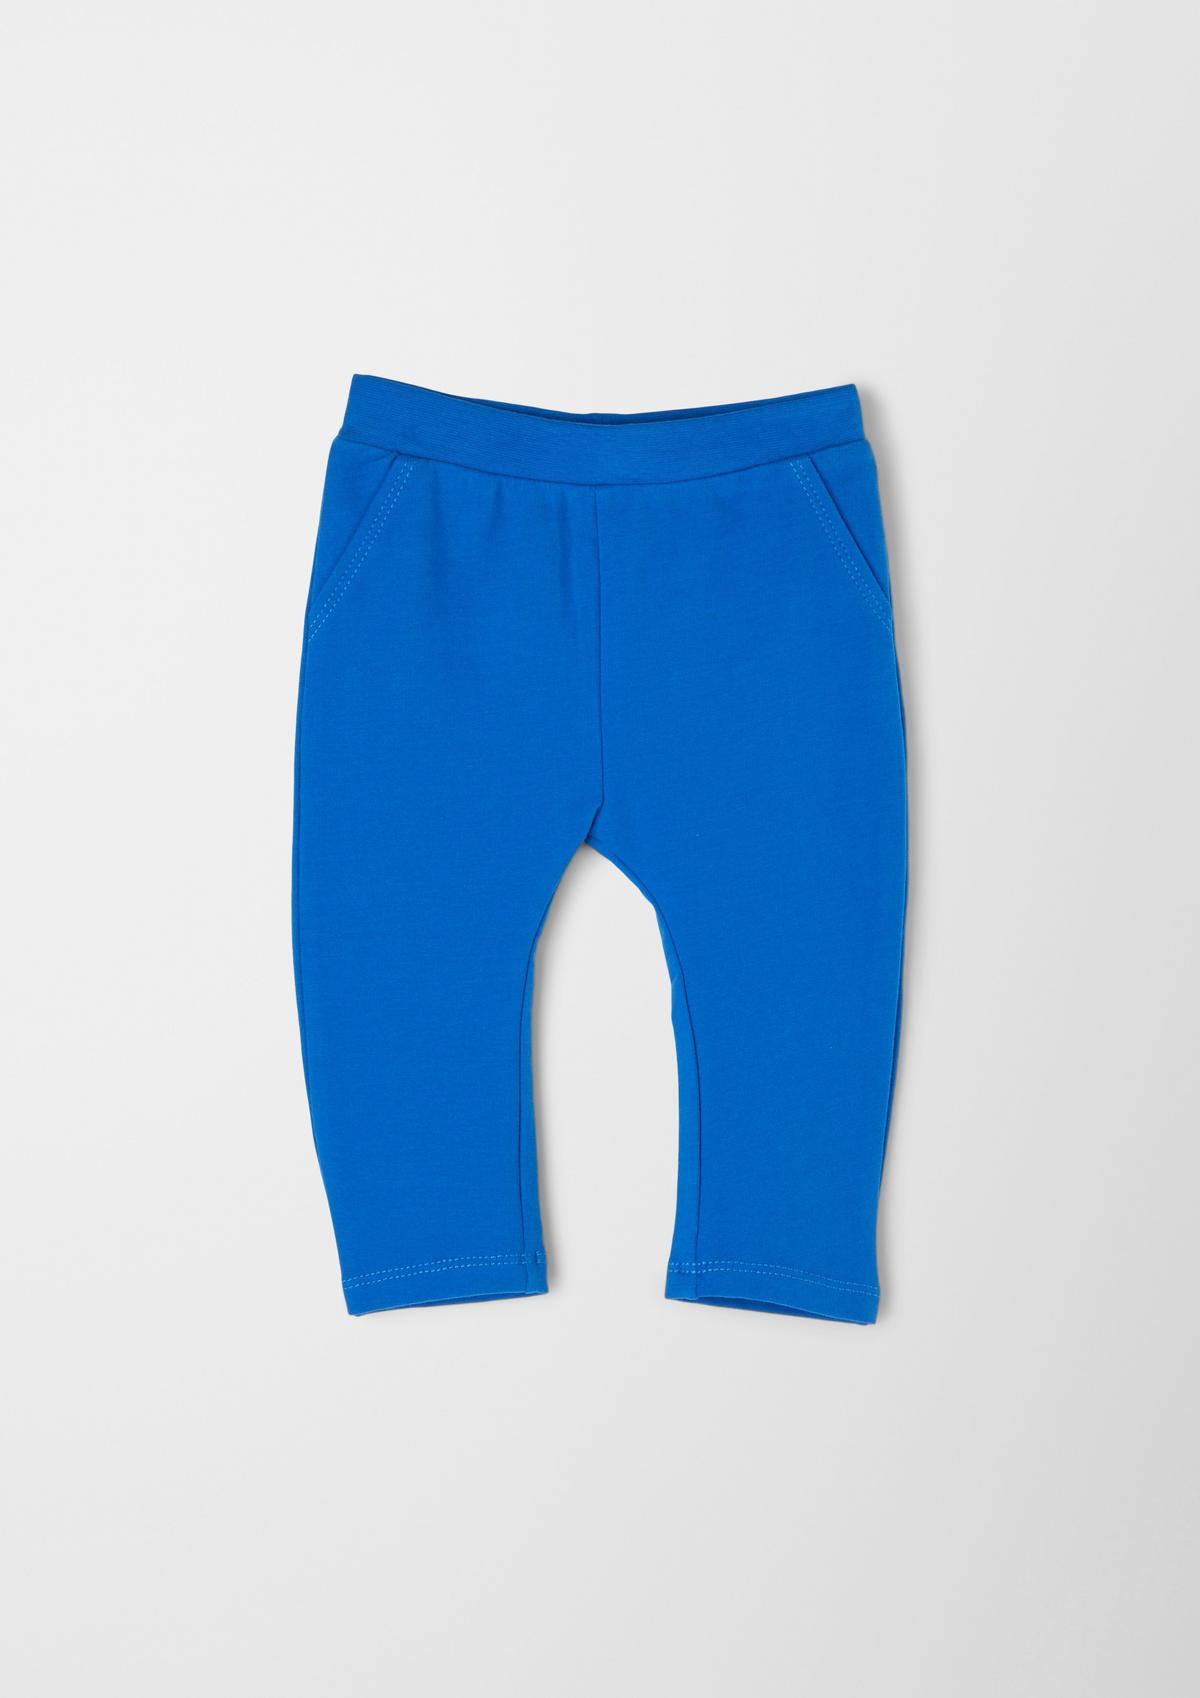 Leggings in sweatshirt fabric s - an elasticated royal waistband | with blue